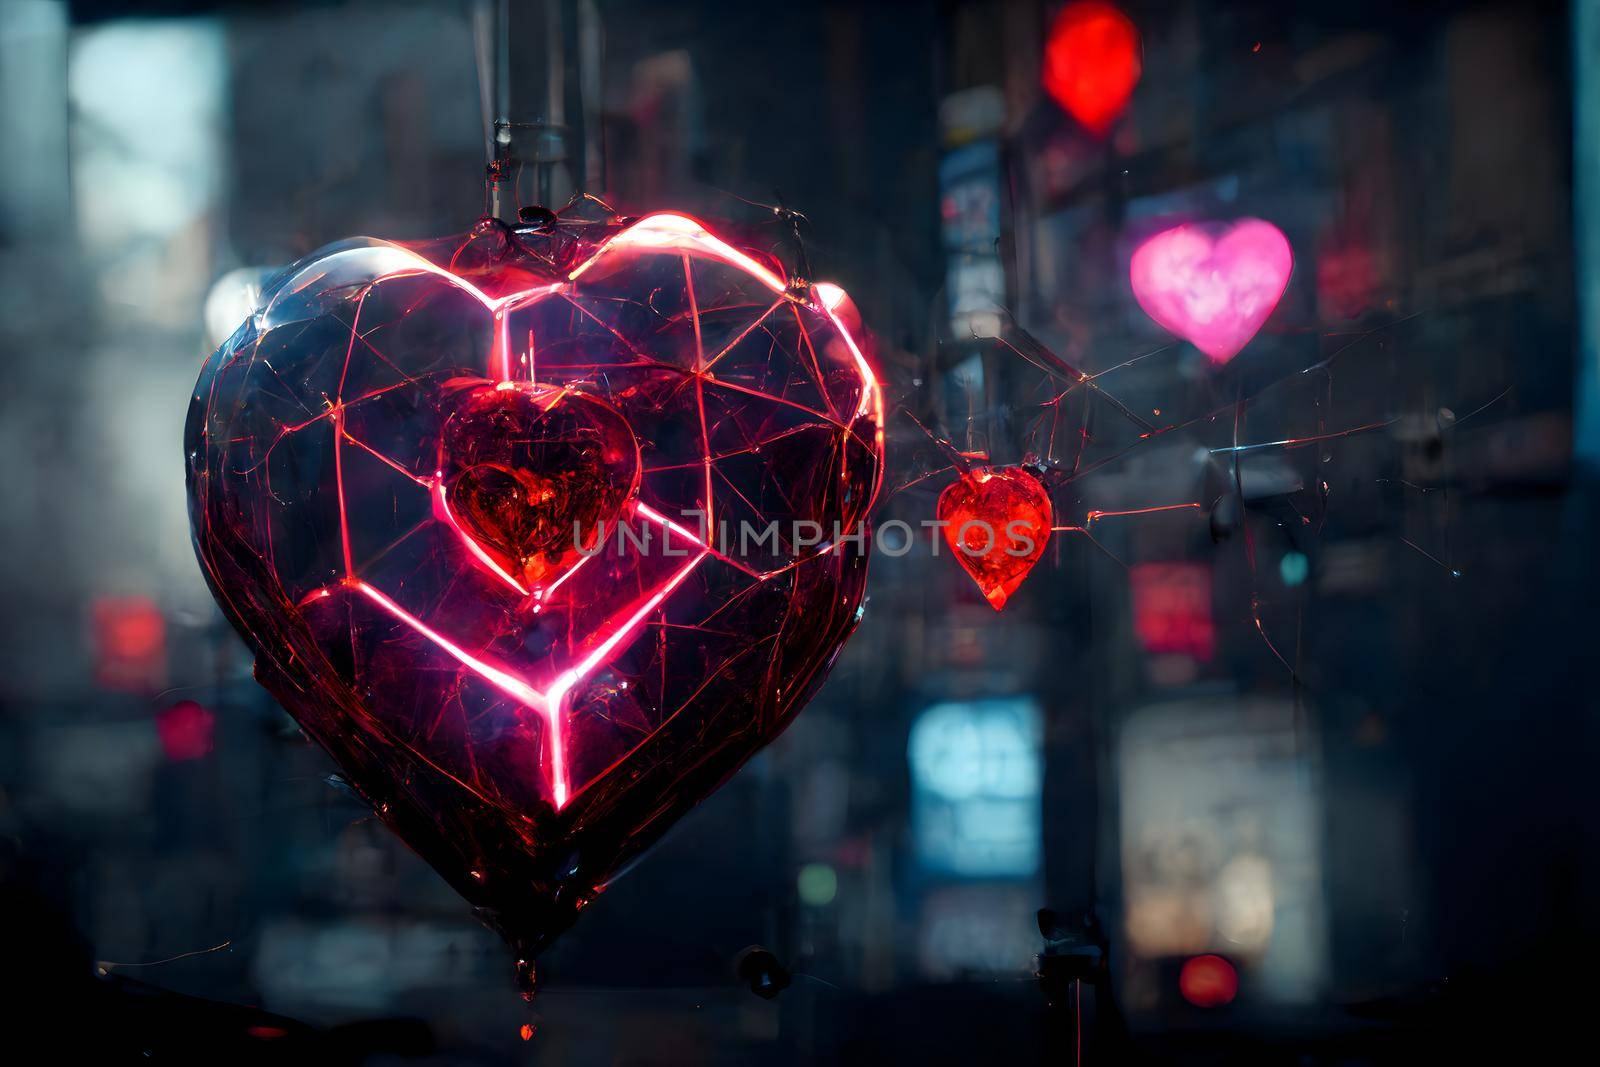 cyberpunk neon high-tech heart in night city environment, neural network generated art for valentines day. Digitally generated painting-like image. Not based on any actual scene or pattern.